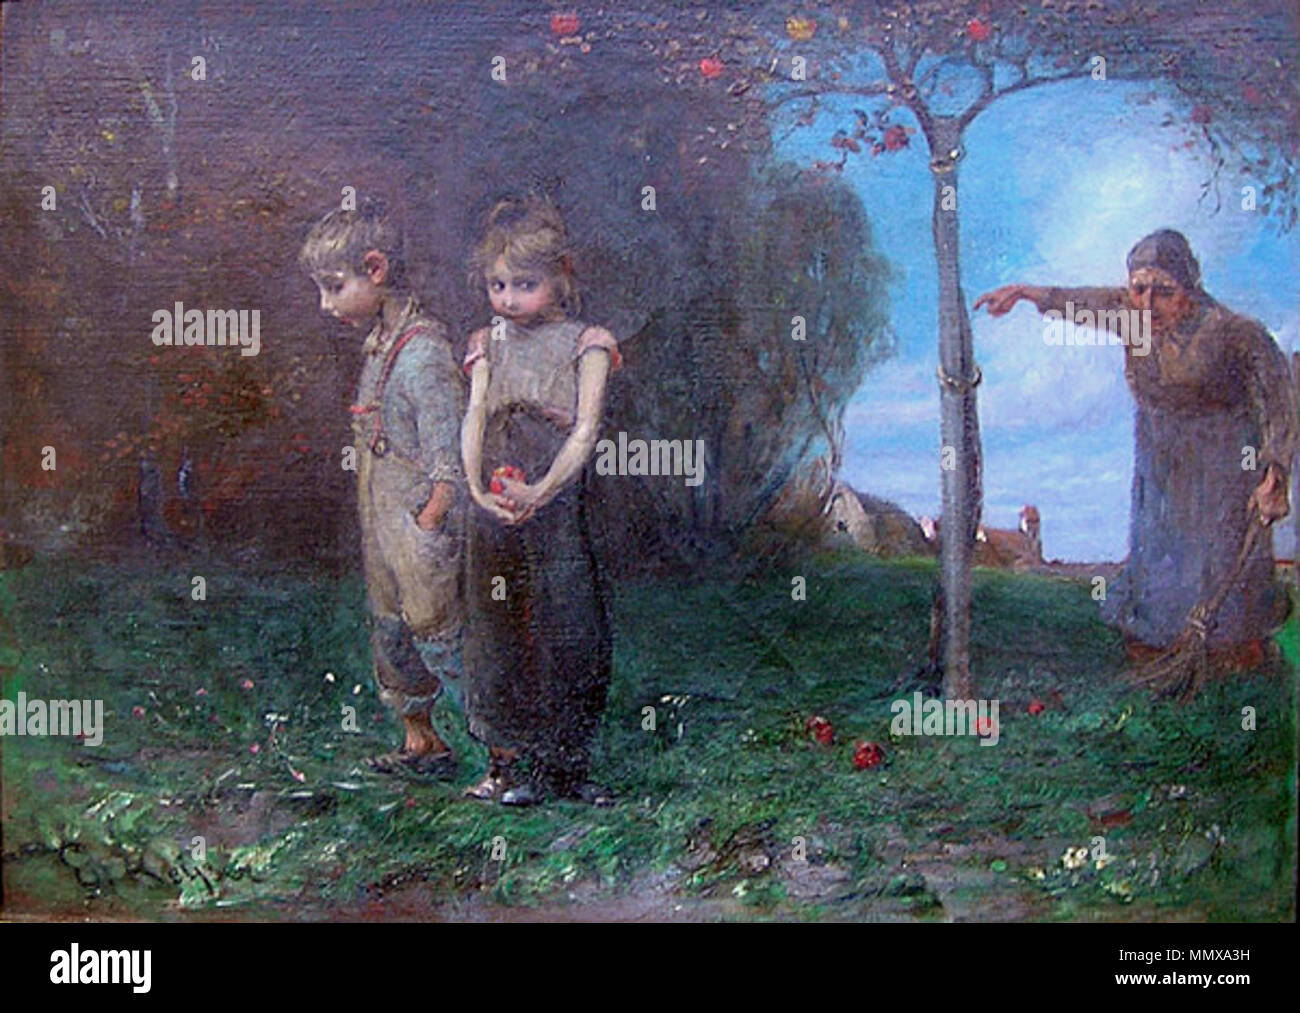 . two children are expelled from an orchard by an old lady who caught them stealing apples  Expulsion from the Garden of Eden. by 1898.   Elisabeth Keyser  (1851–1898)     Alternative names Hilda Elisabeth Keyser  Description Swedish painter  Date of birth/death 22 January 1851 16 December 1898  Location of birth/death Stockholm Stockholm  Work location Paris (1882 - 1890); Stockholm (1891 - 1898)  Authority control  : Q4958665 VIAF:?96334141 ULAN:?500089711 KulturNav:?bb97d674-ea8a-4b99-aef3-36abb7e19e1d RKD:?44217 Elisabeth Keyser Expulsion from the Garden of Eden Stock Photo